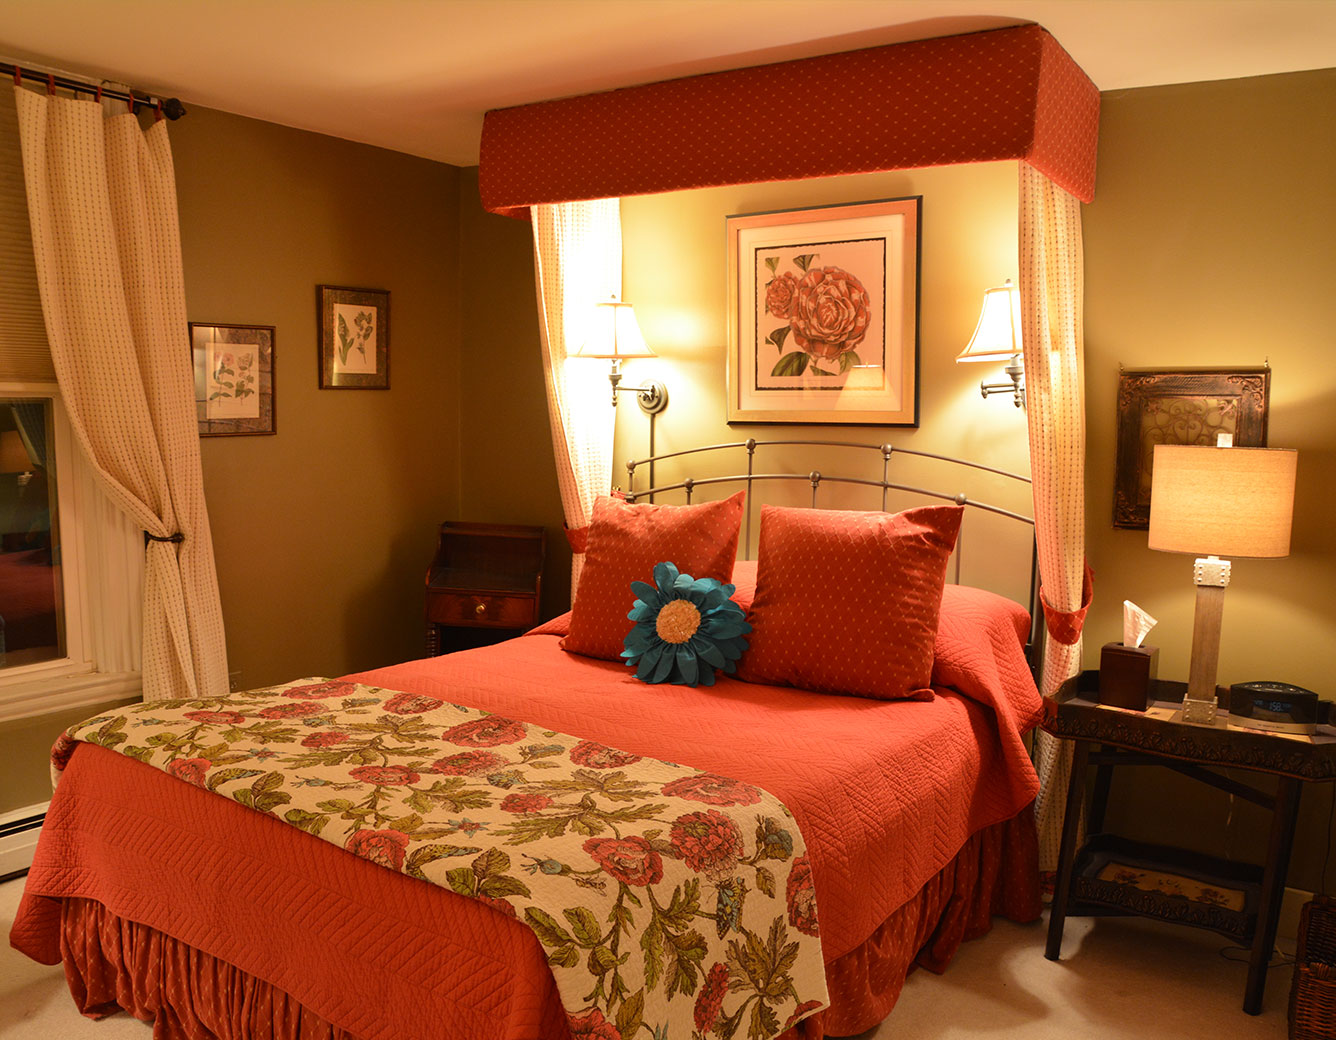 Rose Room, Magnolia Place Bed & Breakfast, Finger Lakes, NY